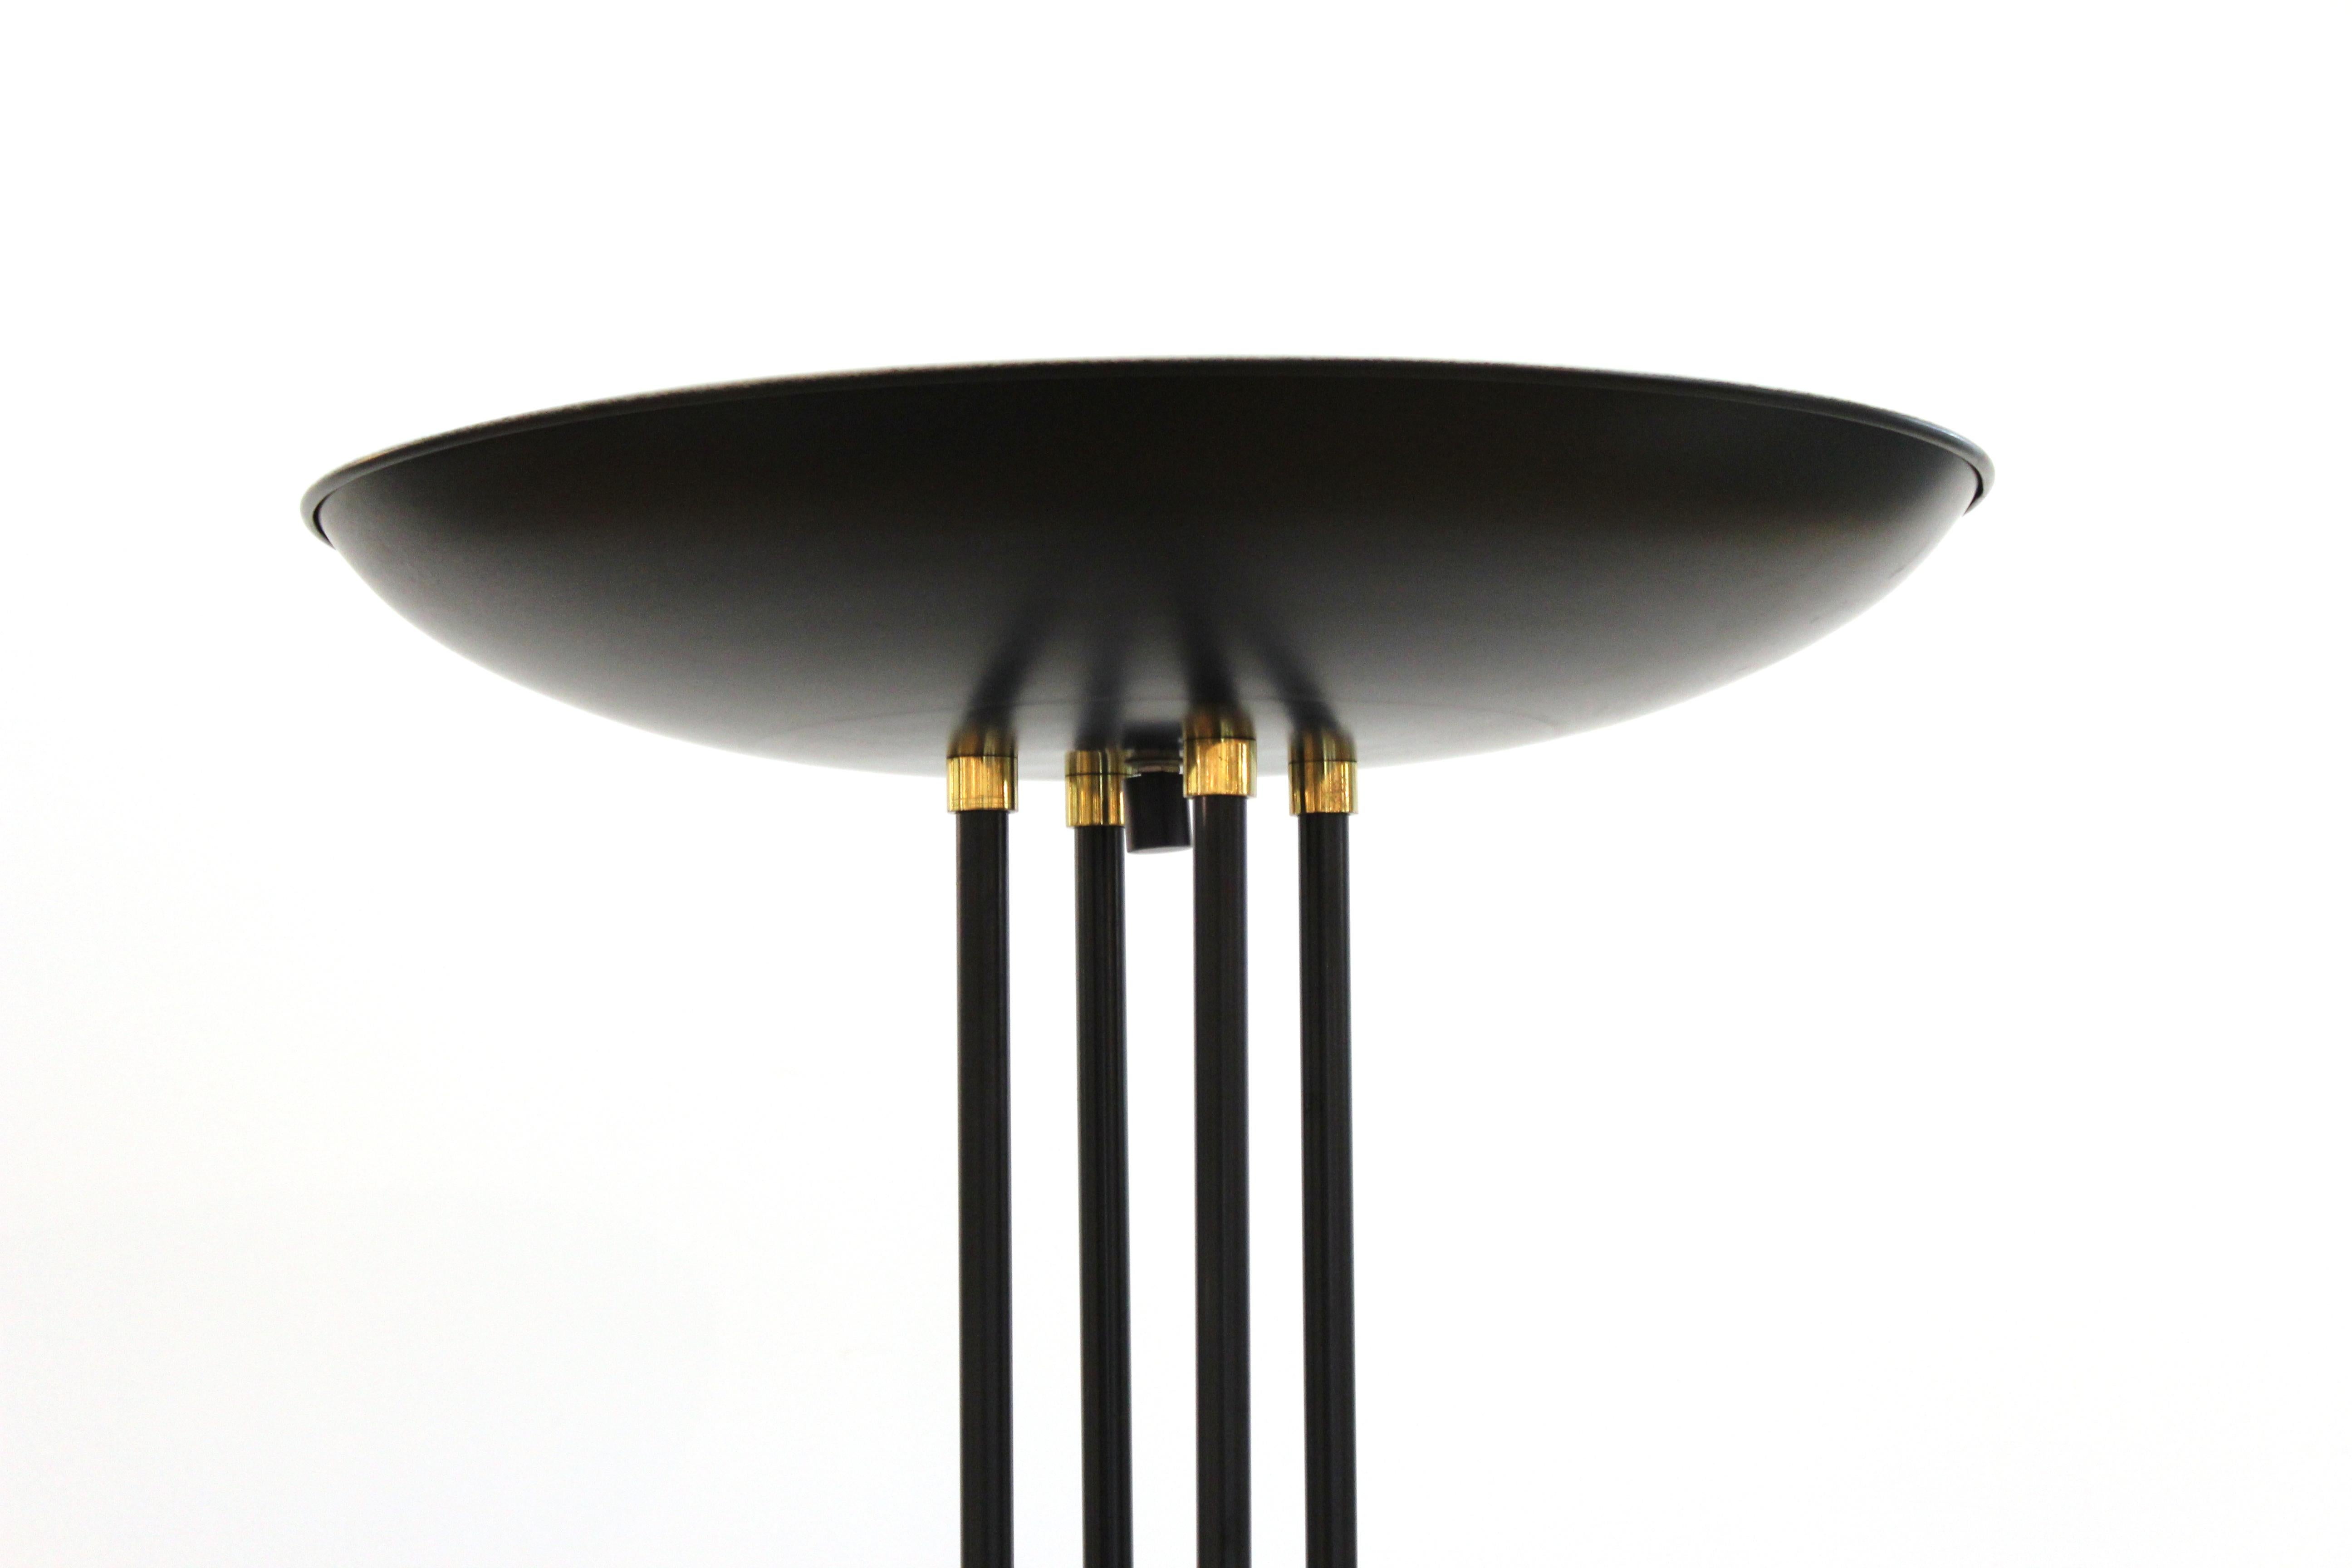 Postmodern black enameled metal halogen floor lamp / torchiere, with tubular rods supporting saucer shade with brass detail. Measures: 70.5